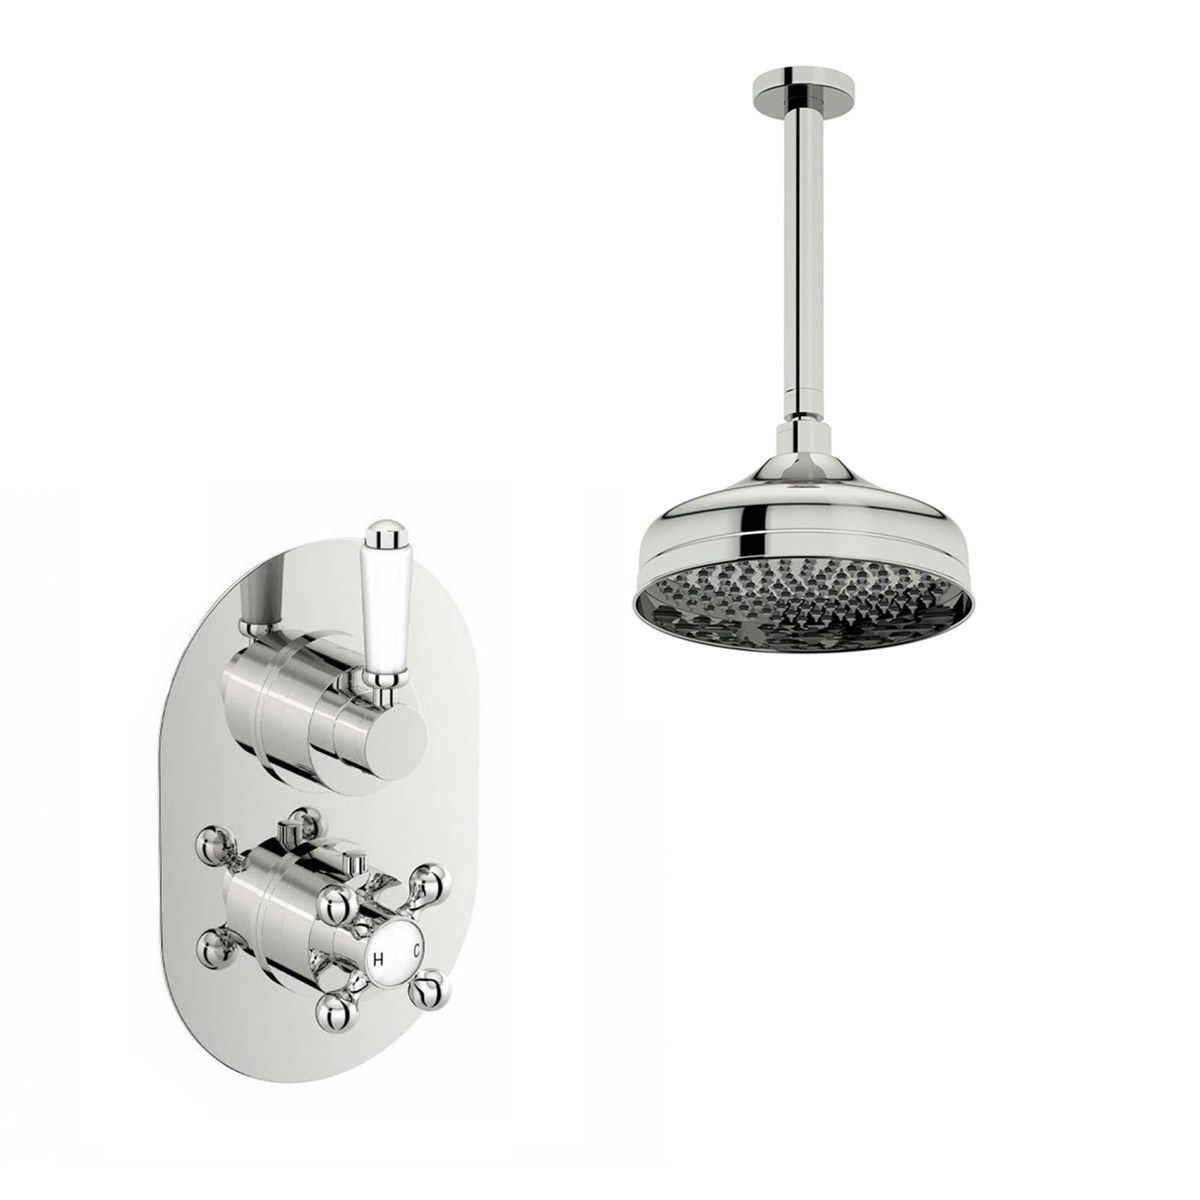 Orchard Dulwich concealed thermostatic mixer shower with ceiling arm